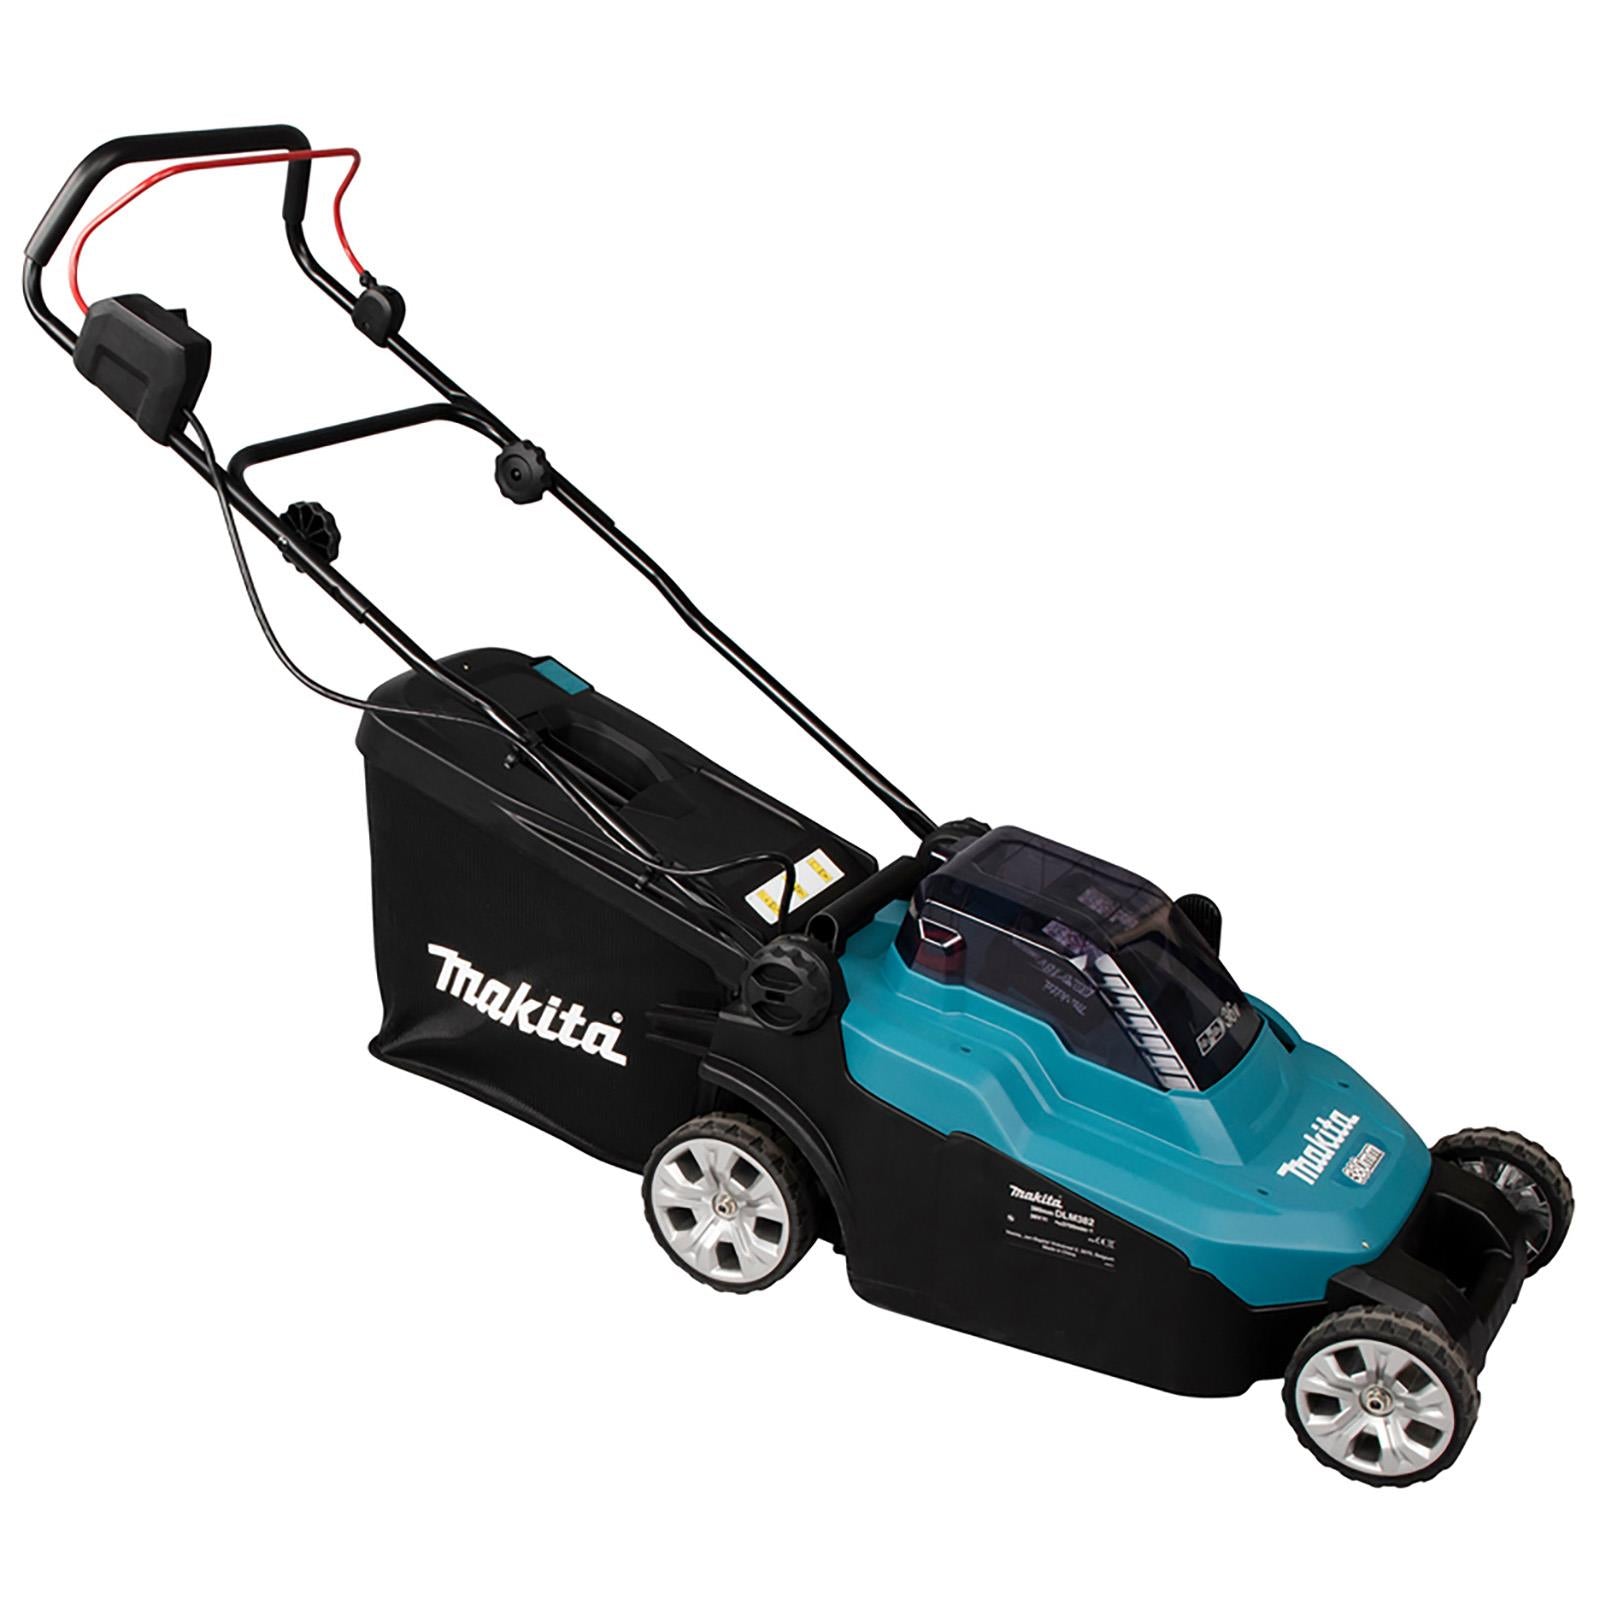 Makita 38cm Lawn Mower Kit Twin 18V LXT Li-ion Cordless Garden Grass Outdoor 2 x 6Ah Battery and Dual Rapid Charger DLM382PG2